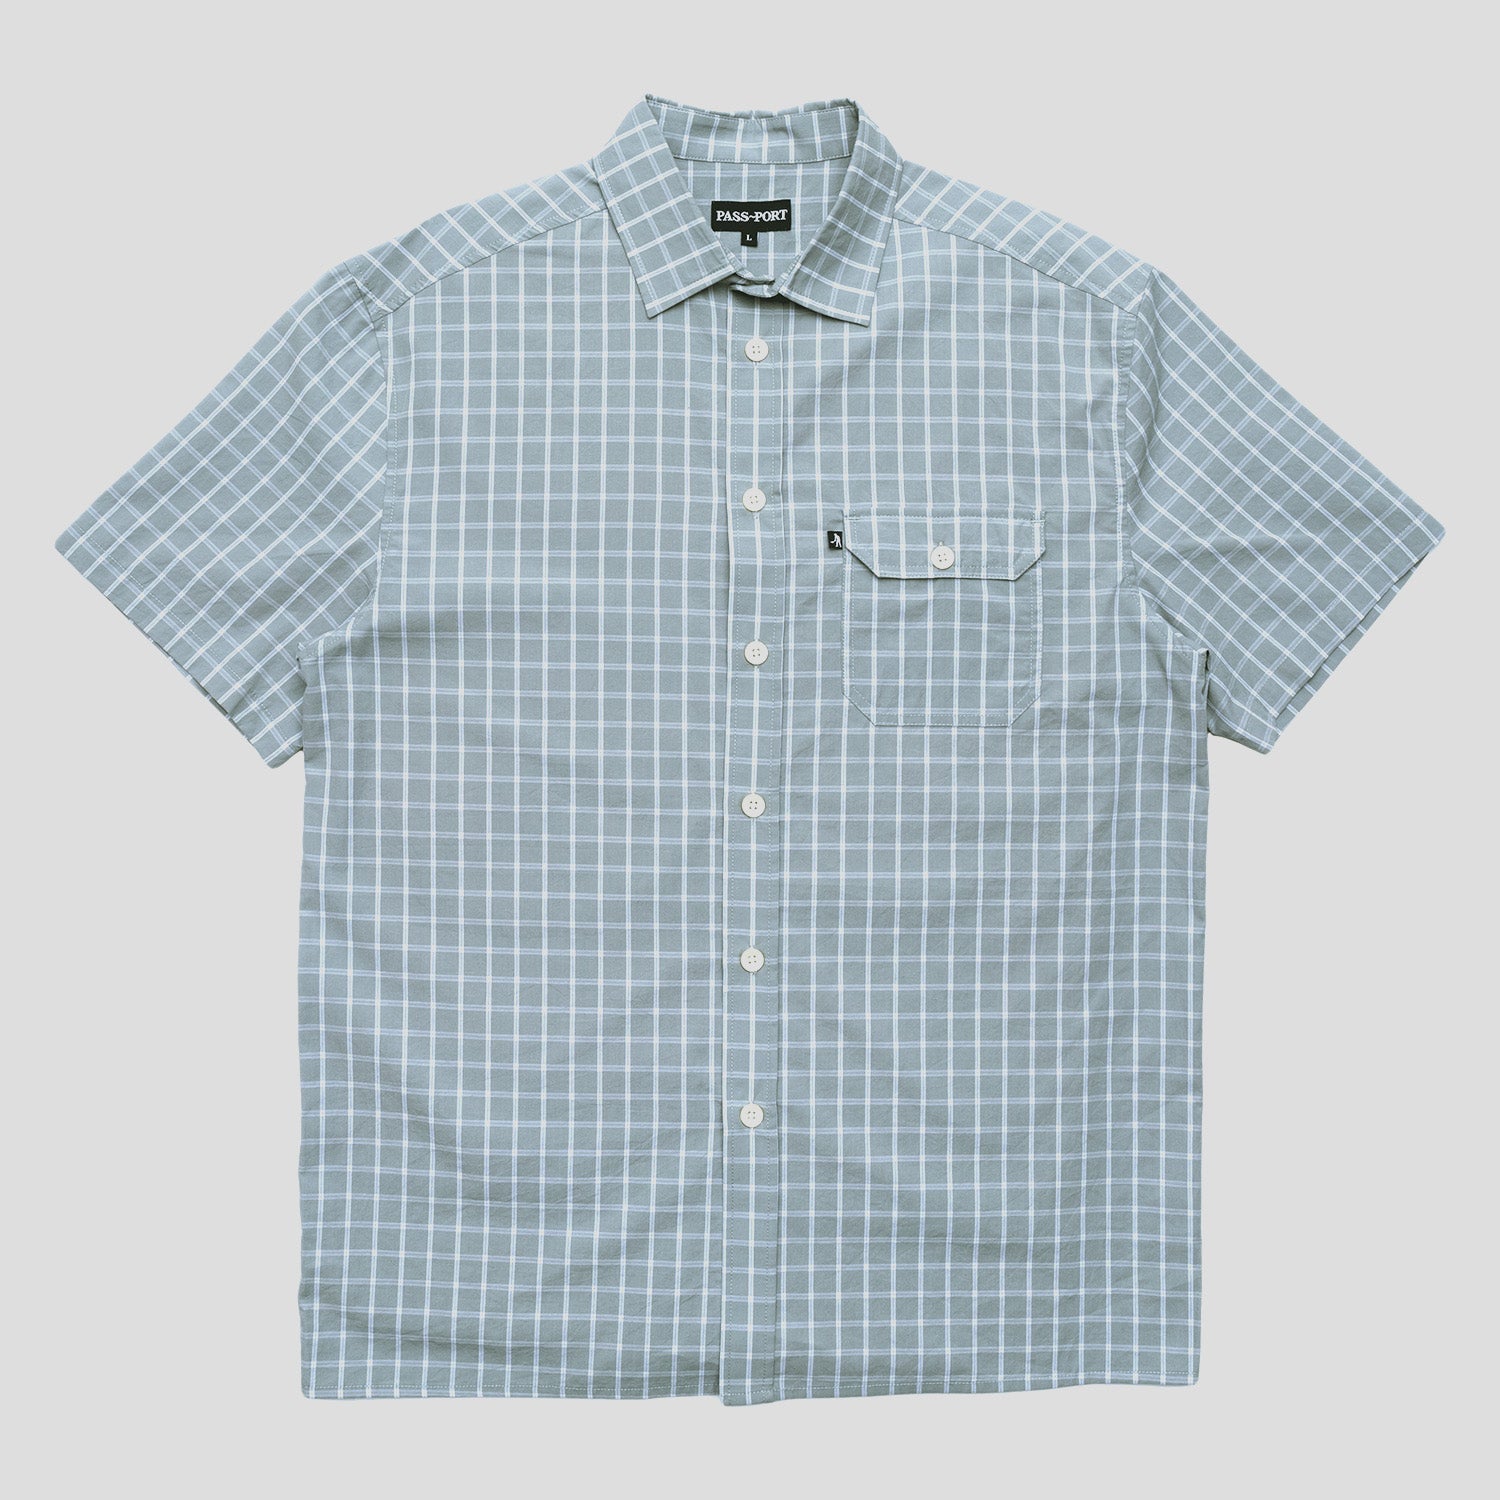 Pass~Port Workers Check Shirt Short Sleeve - Stone